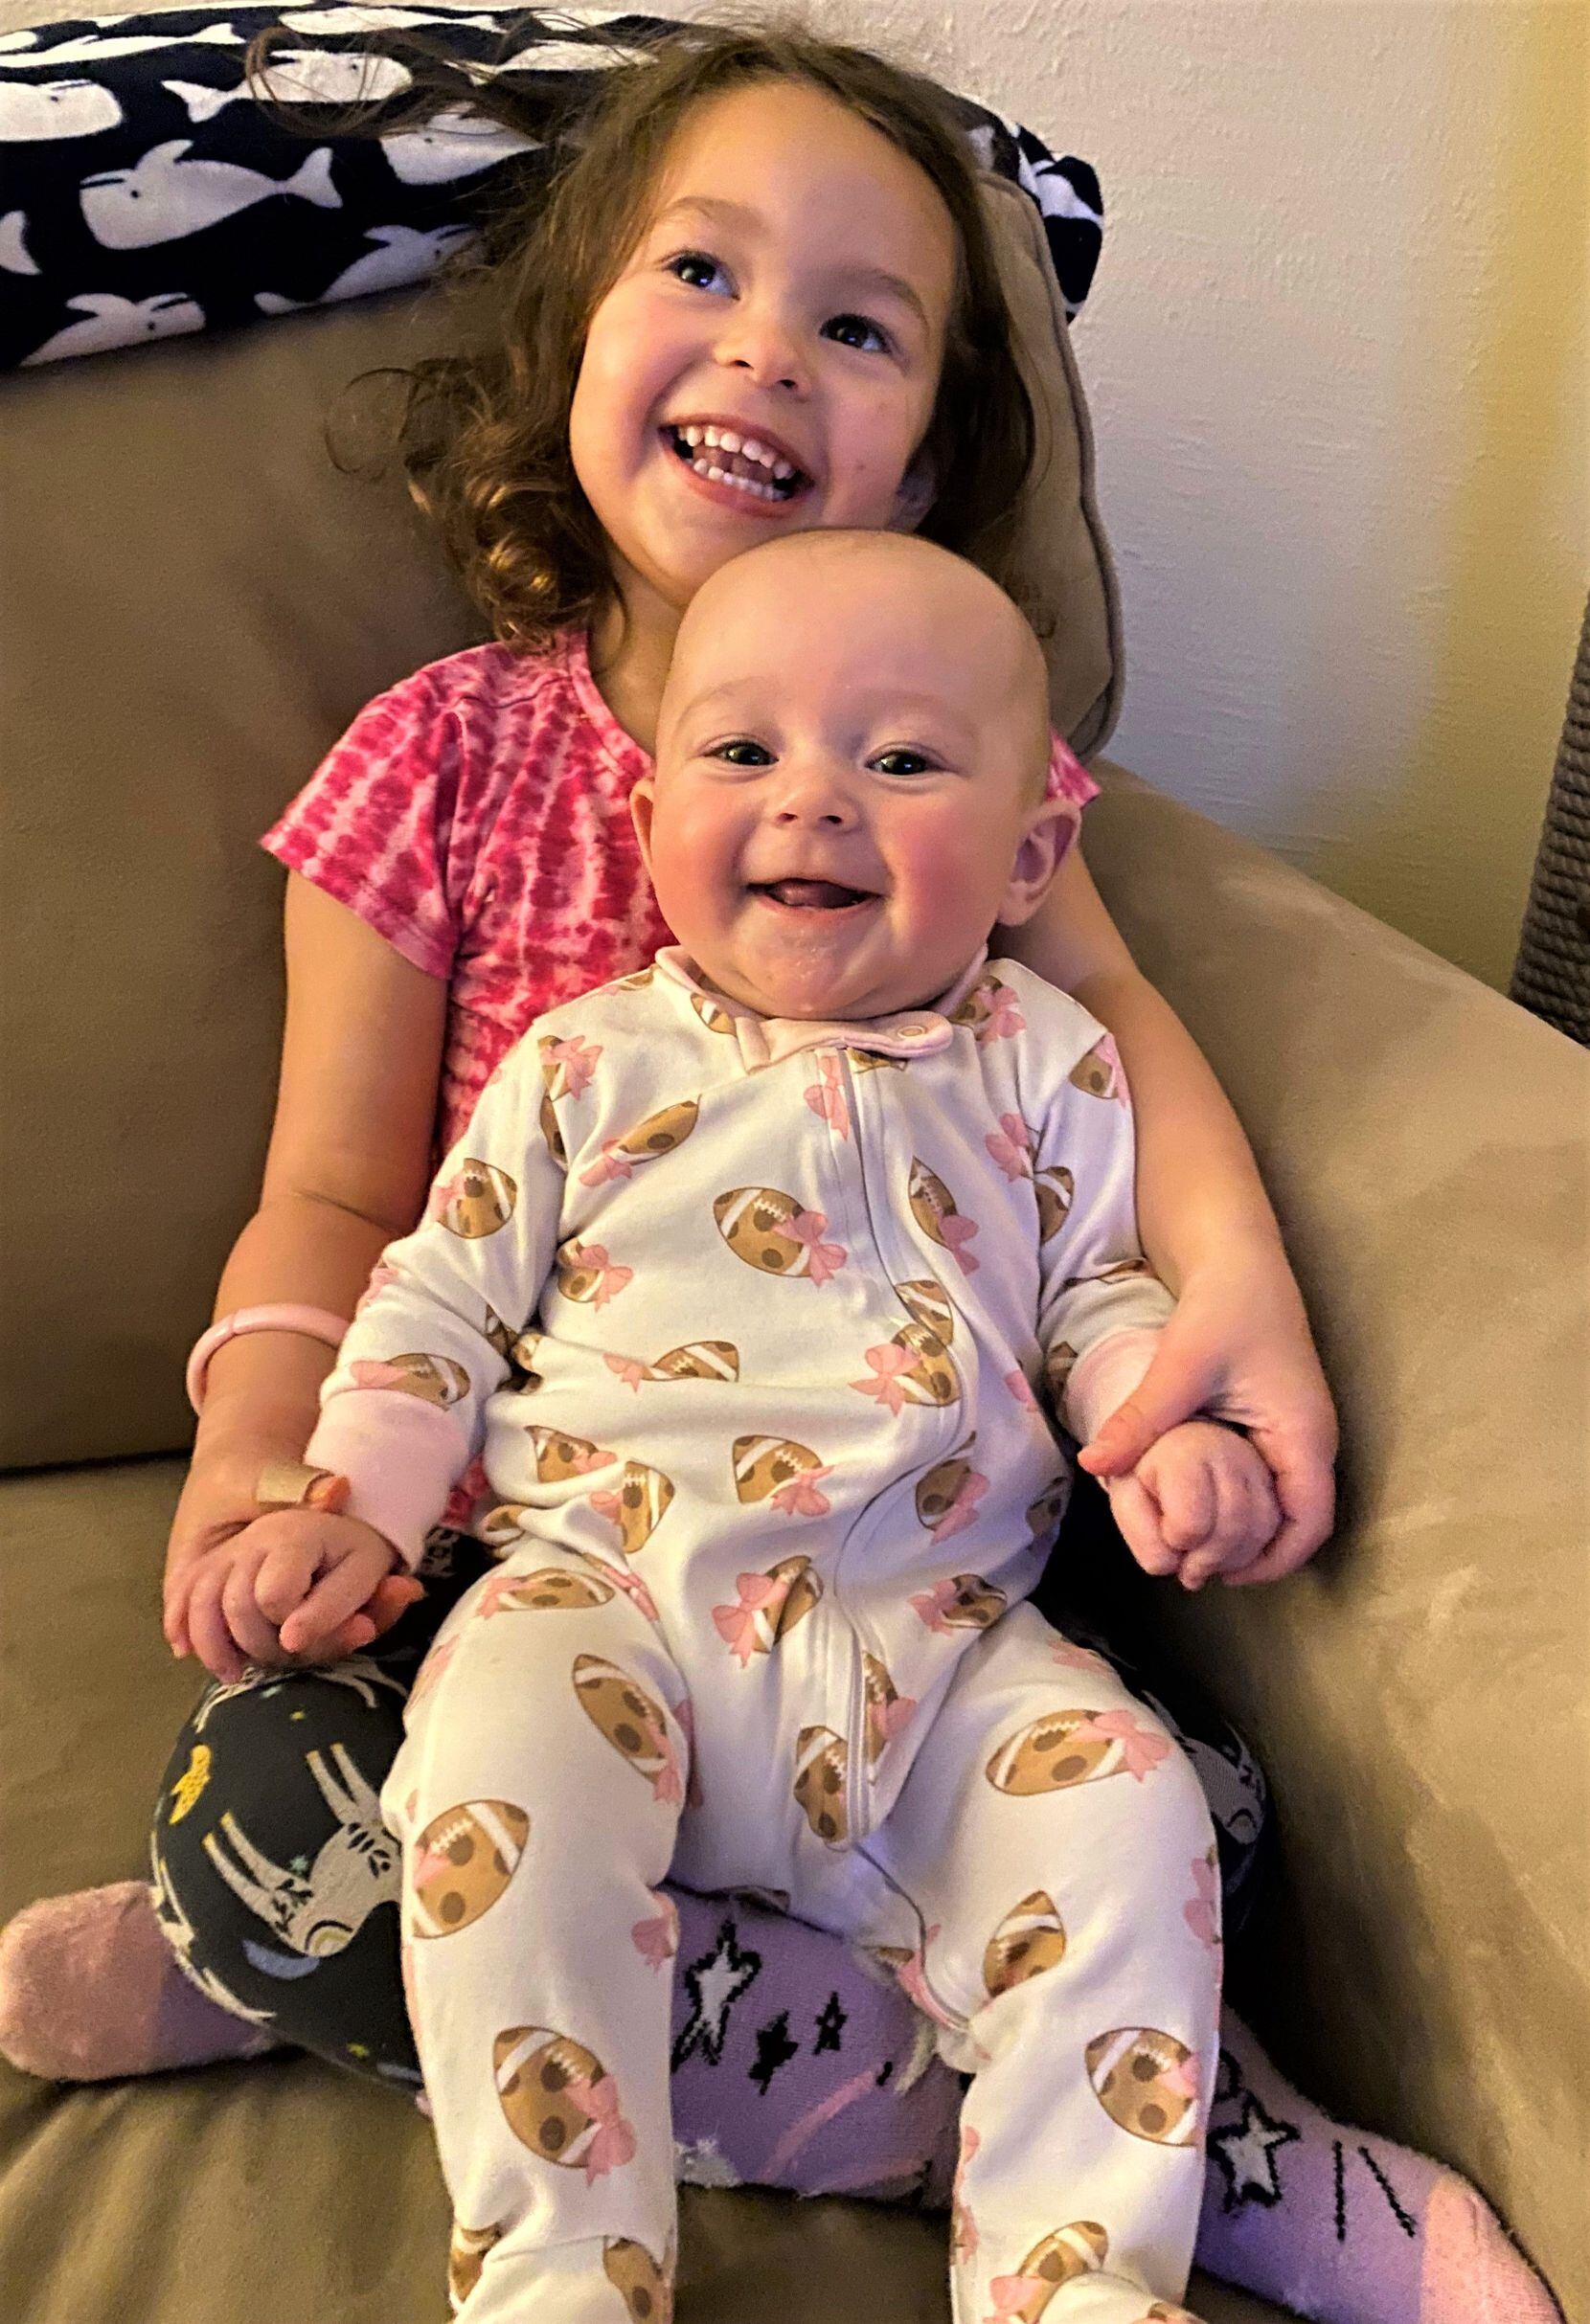 Oh, baby, the Cowboys have been good this season! And Christina Goldberg hopes that with little daughter Claire Goldberg safely snuggled up in her lucky football onesie, the team can squeak out another victory Sunday to keep their season alive. That would give the whole family, including older sister Meg, something to really smile about!